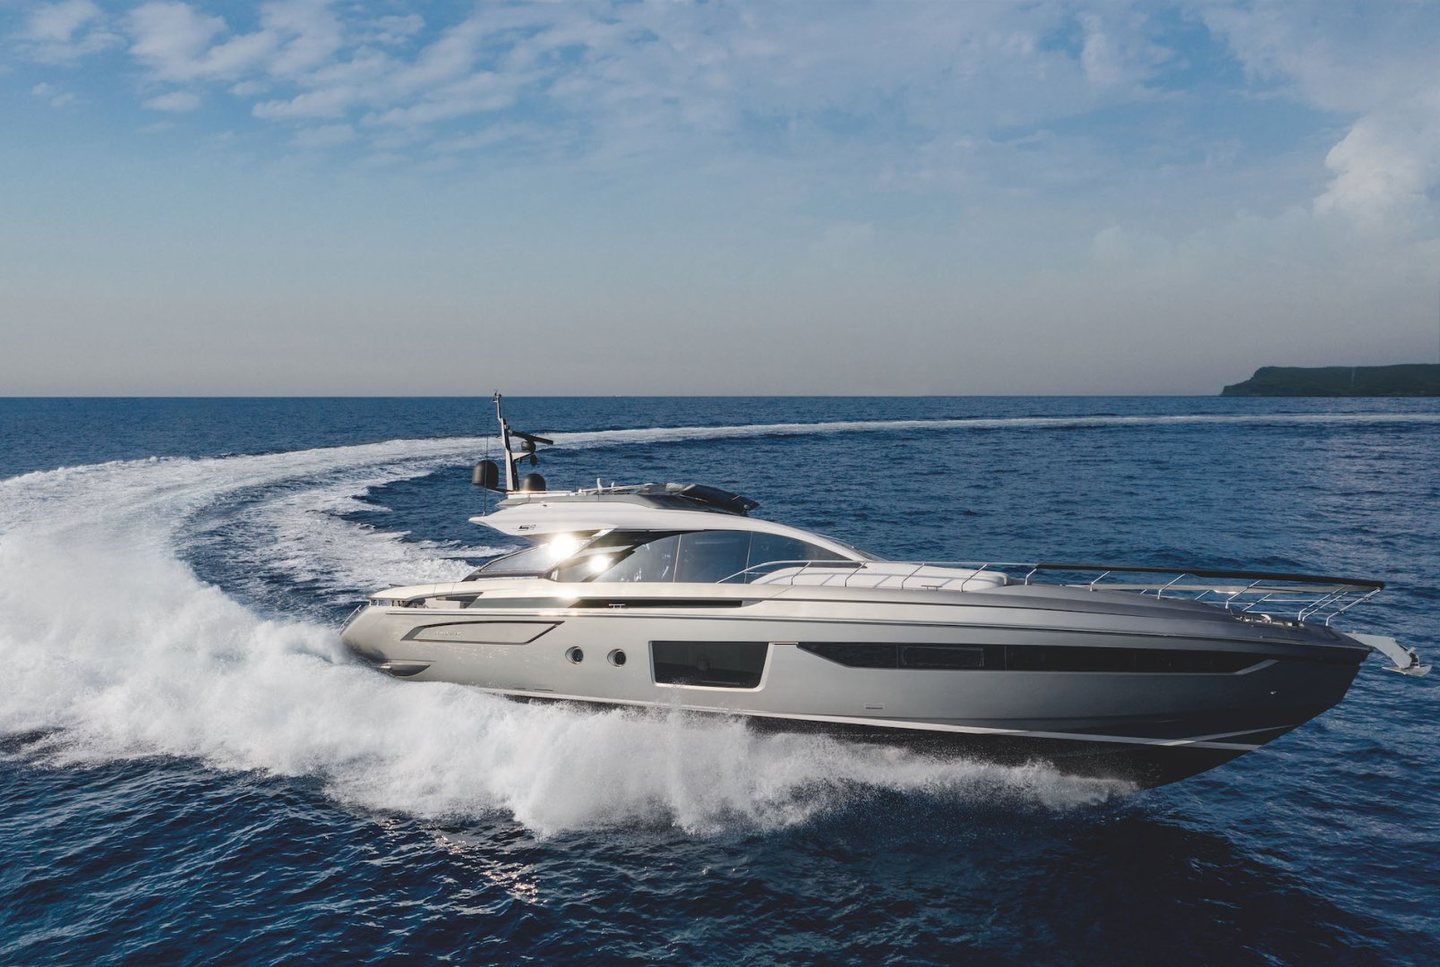 360 VR Virtual Tours of the Azimut S8